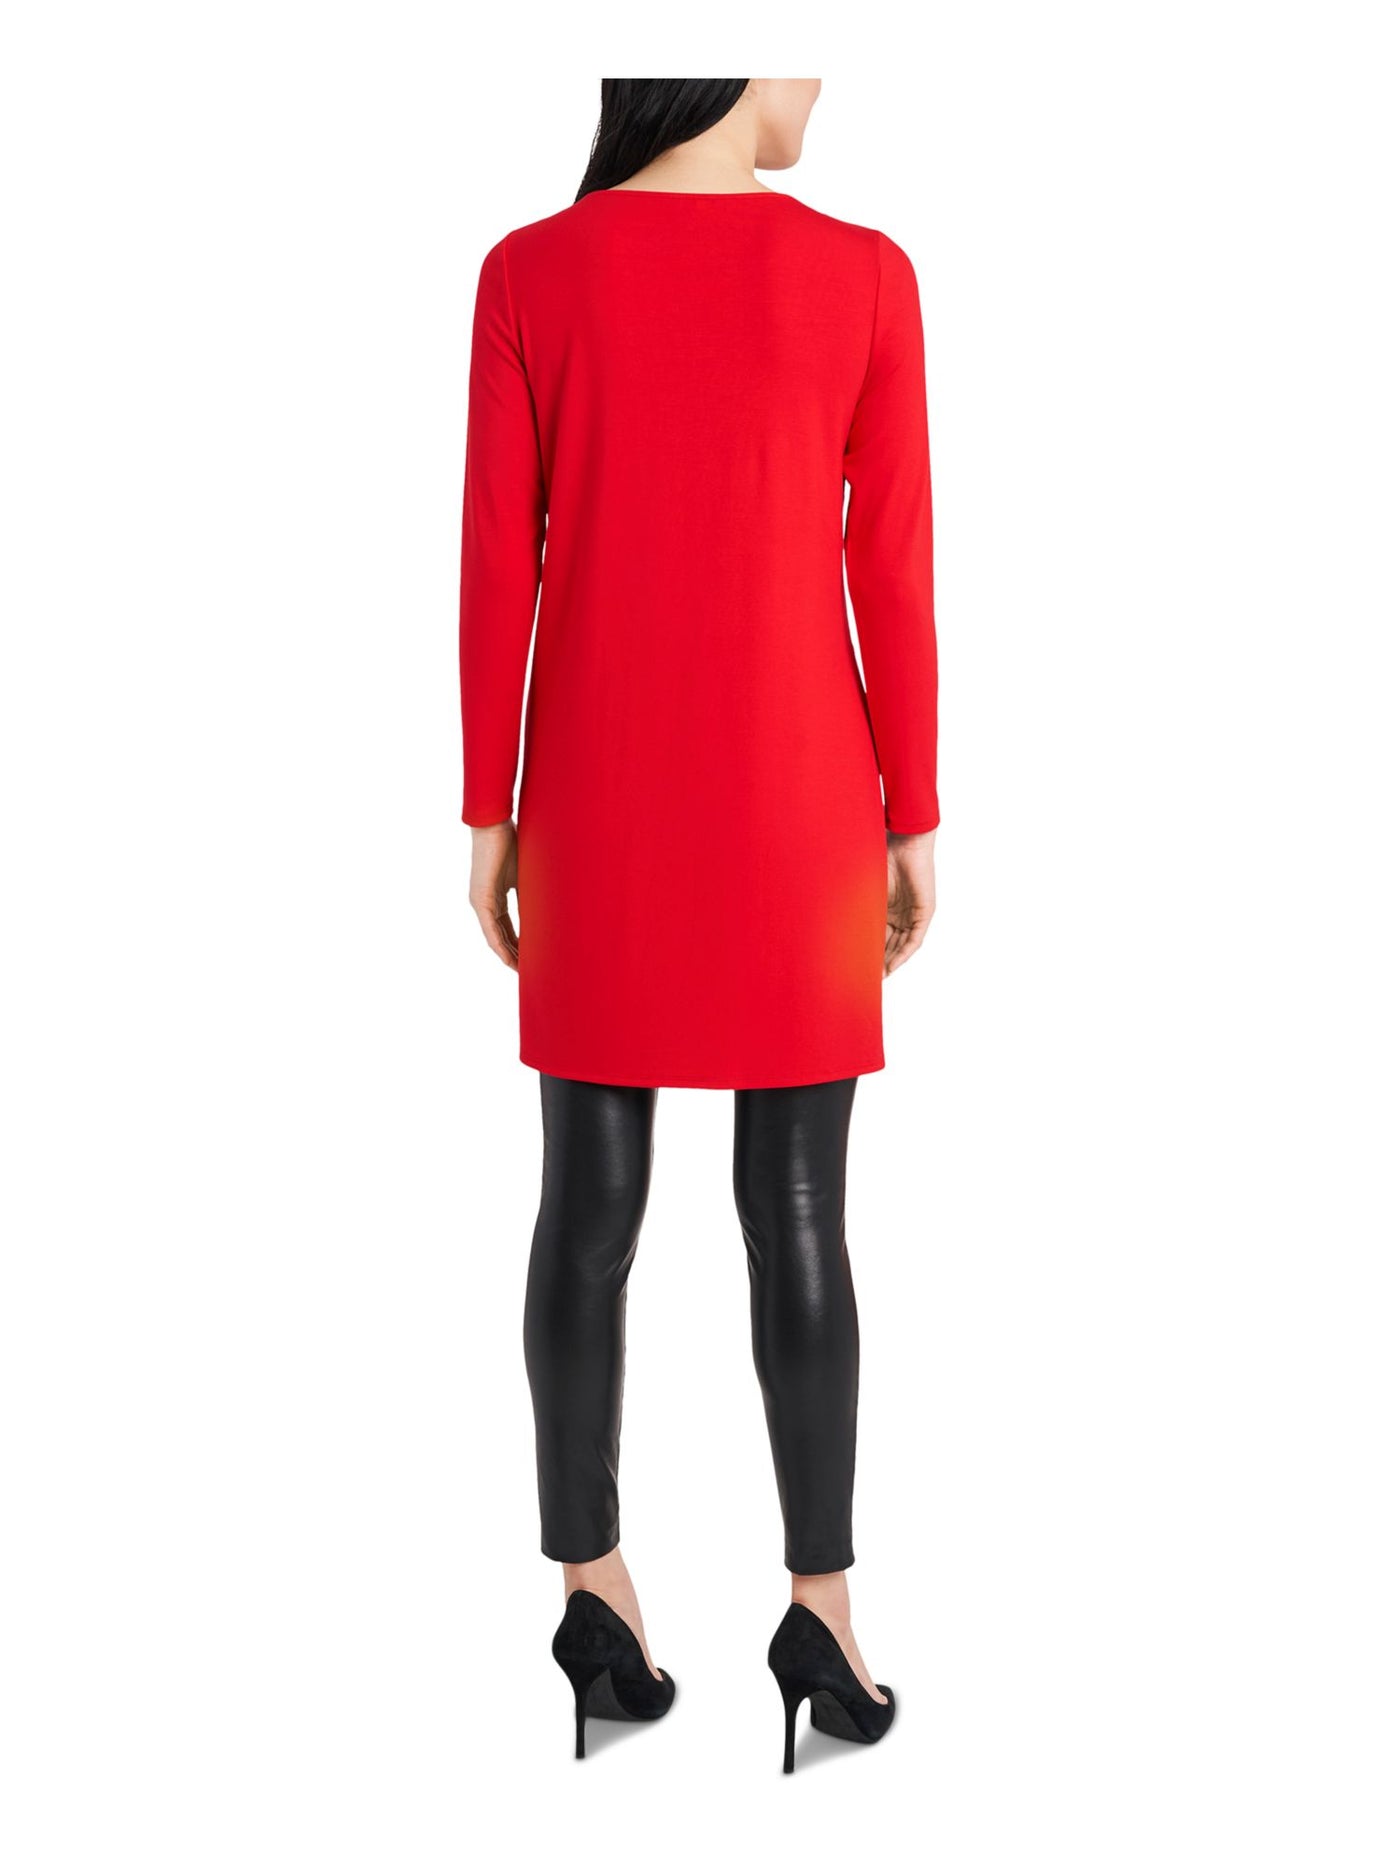 VINCE CAMUTO Womens Red Cut Out Darted Asymmetrical Long Sleeve Round Neck Tunic Top S